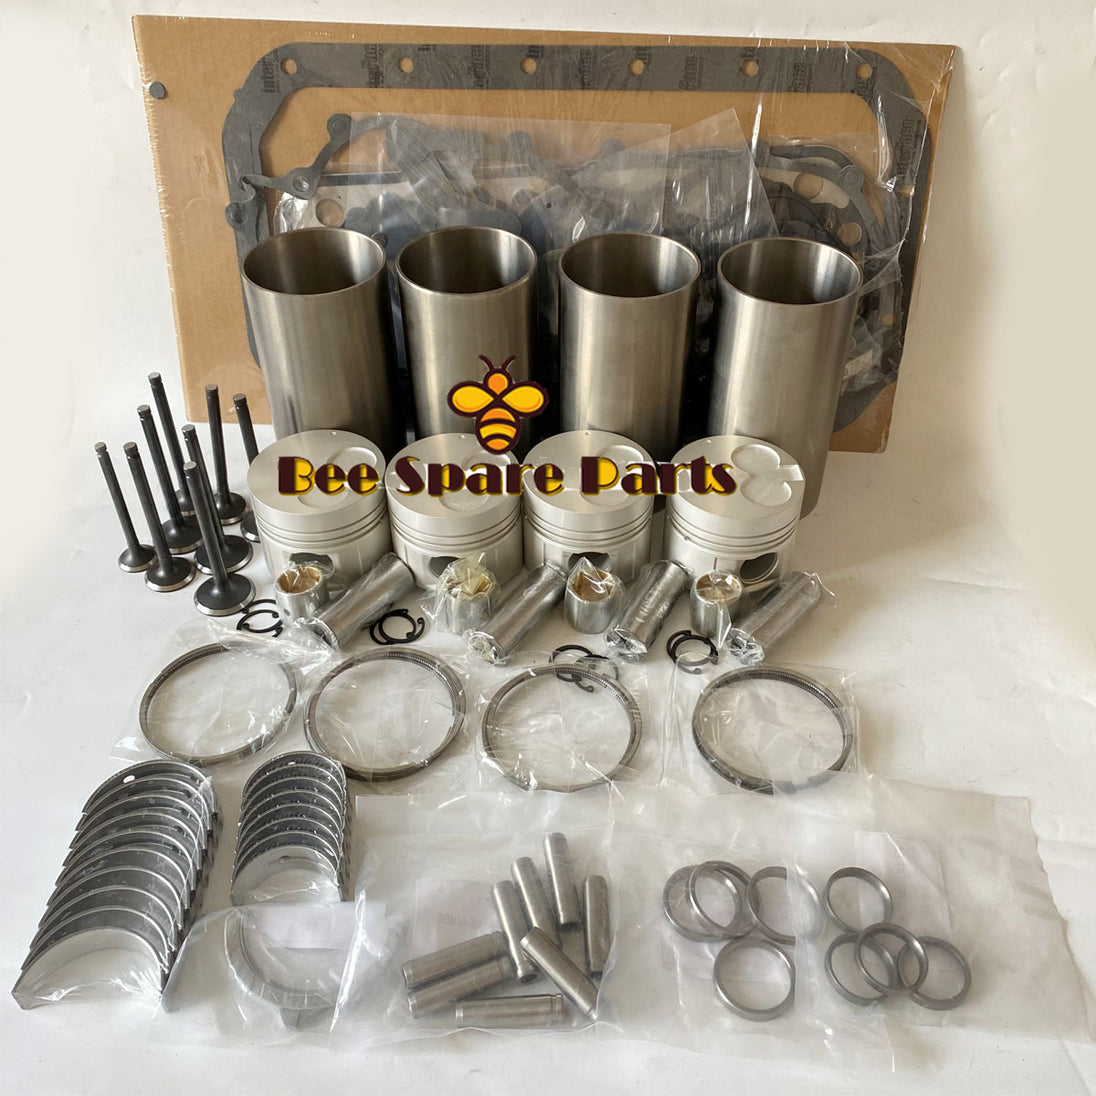 Engine Overhaul Rebuild Kit for Hino W04E Truck 4 Cylinder